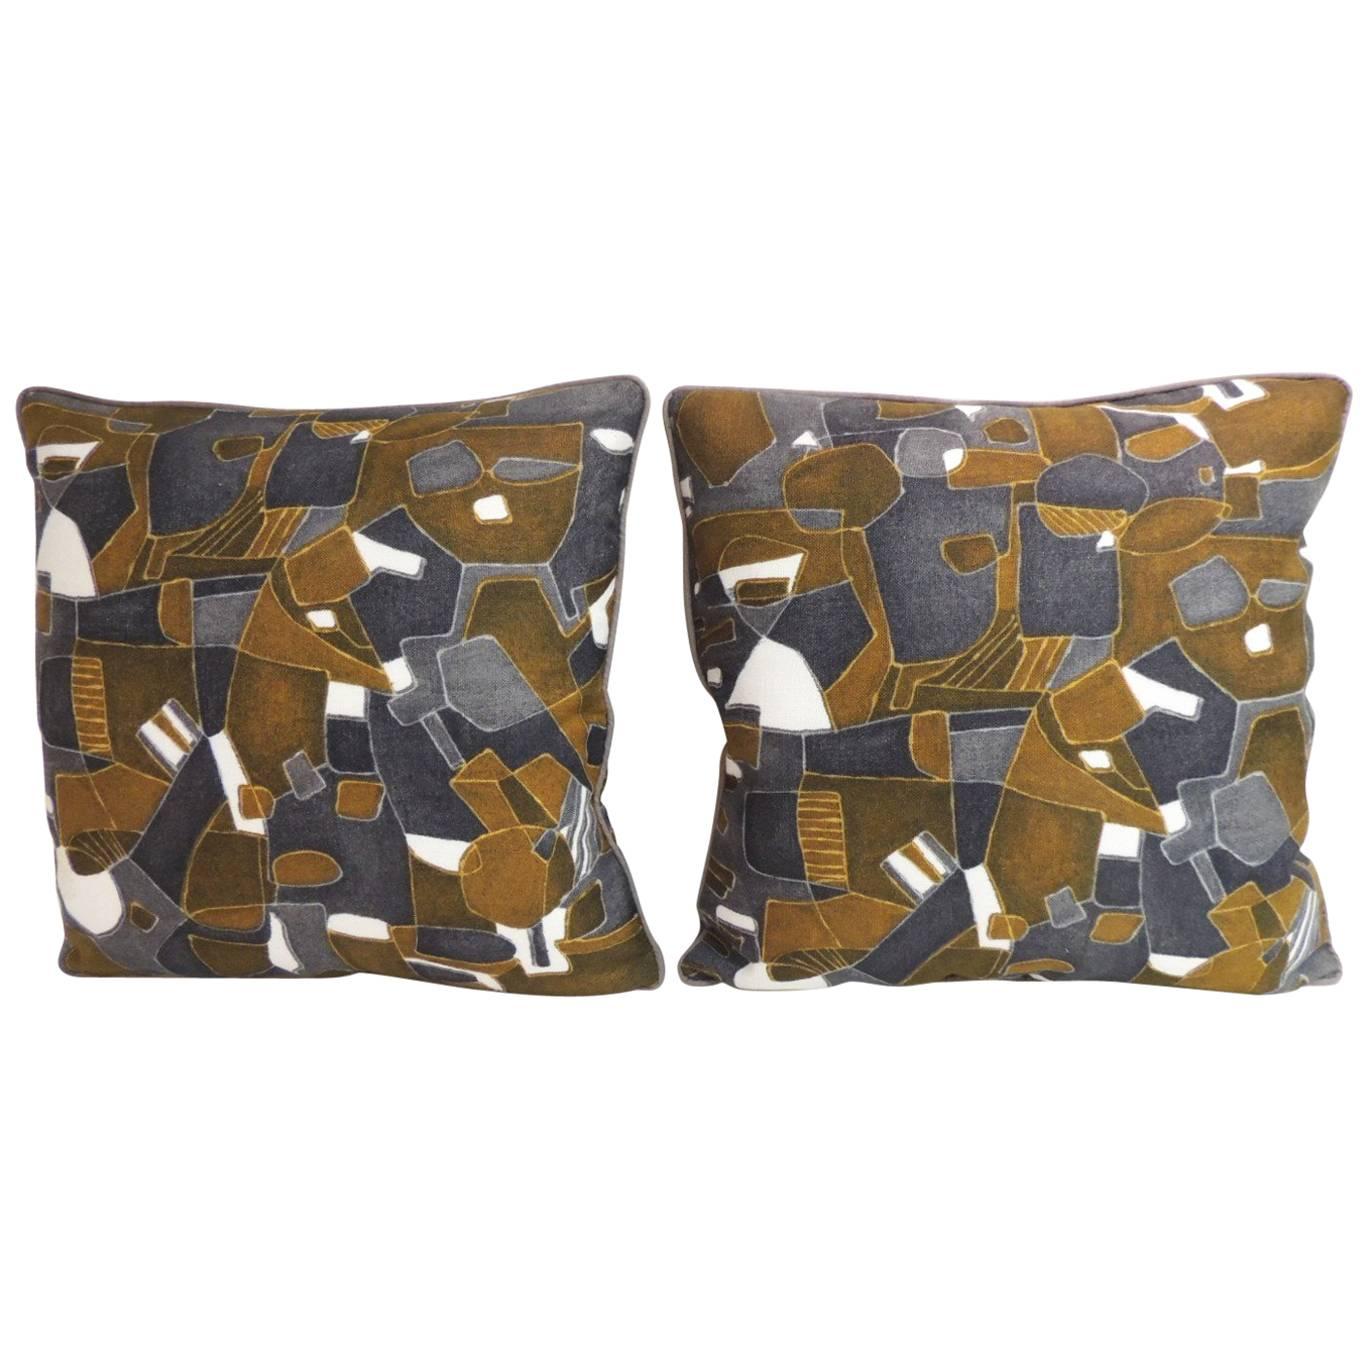 Pair of French Graphic Modern Linen Double Sided Decorative Pillows